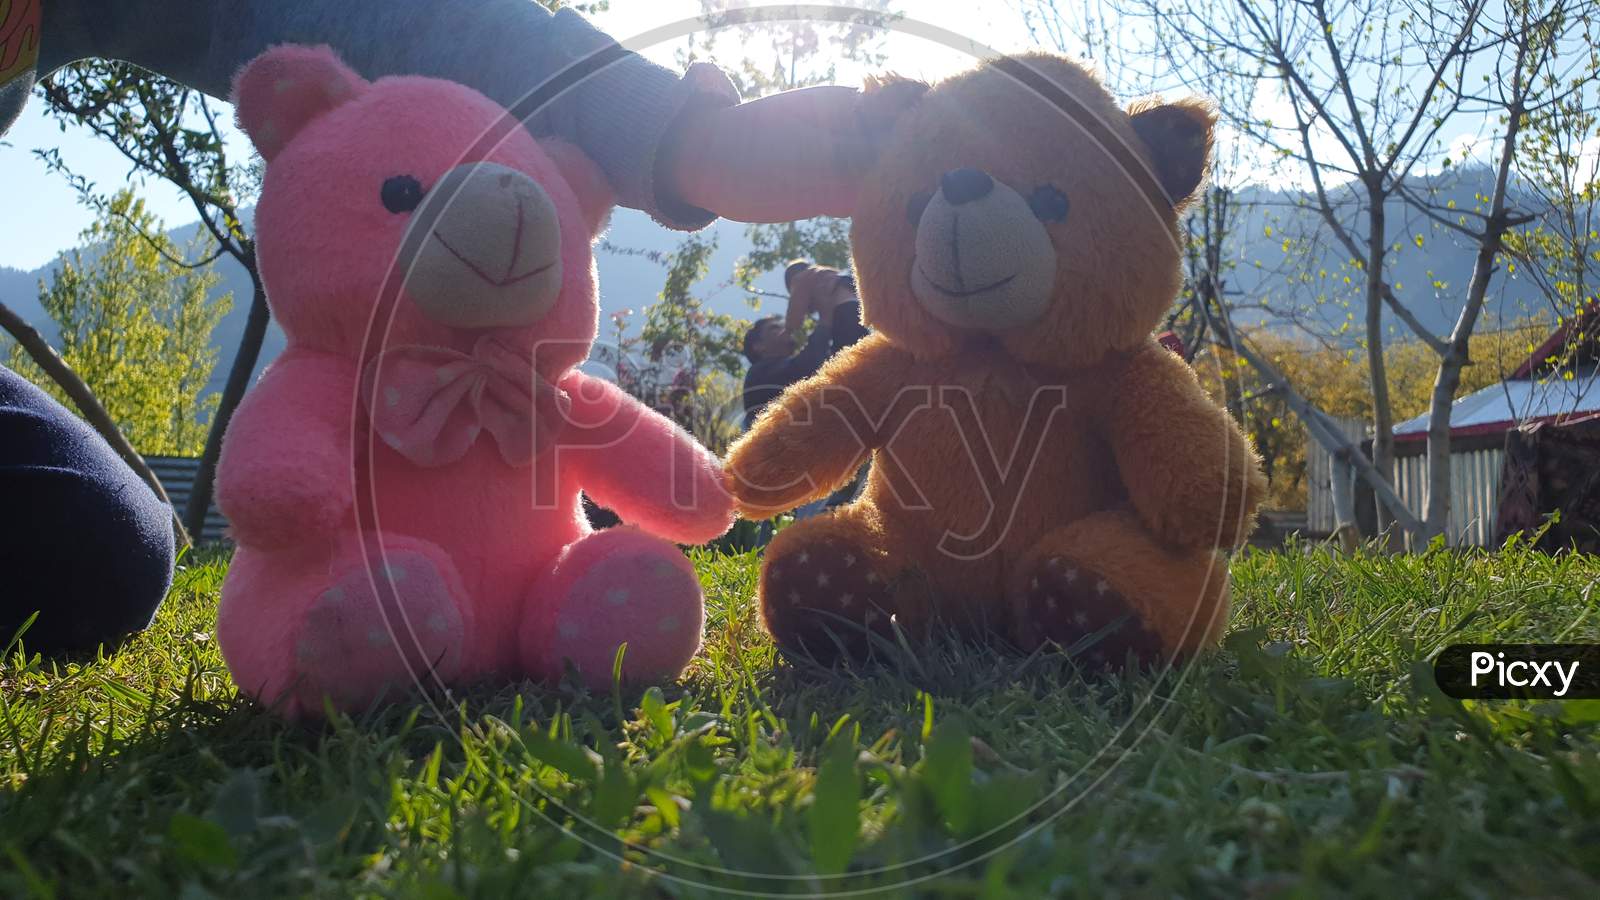 Children Playing With Teddy Bear In A Park. Body Parts Of Kids Seems Playing With Toys. Children Often Express Emotions And Thoughts While Playing With Dolls. Kids World Is Beautiful Greenery Around.